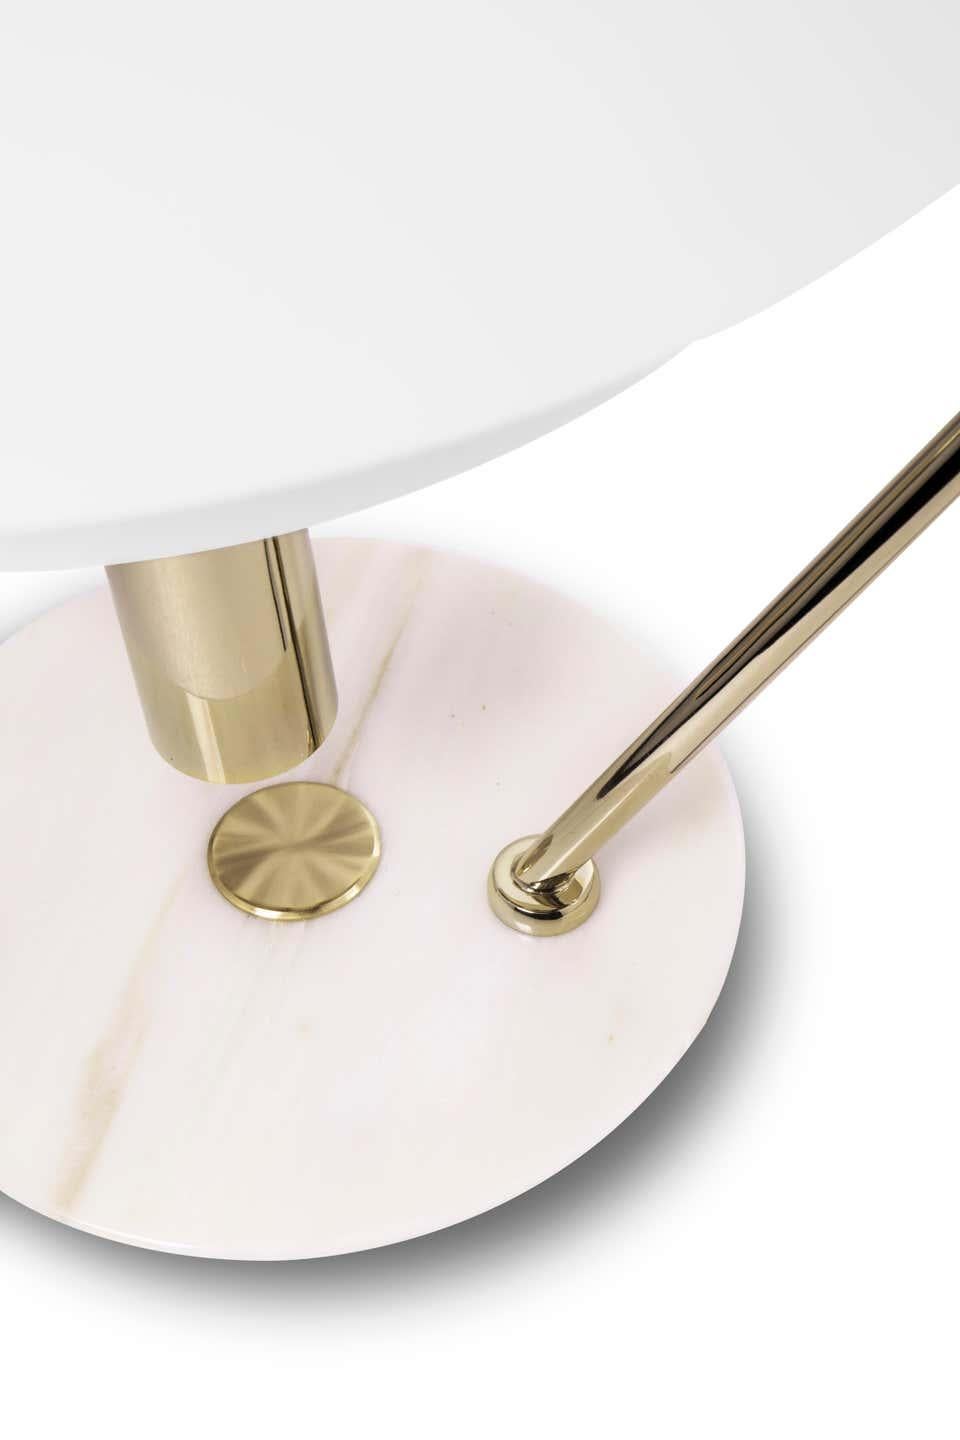 Table light in brass
Handmade in brass, with an aluminum shade and a marble base
Measures: Height 19.69 in. (50 cm)
Width 19.3 in. (49 cm)
Depth 16.15 in. (41 cm)
Estimated production time:6-7 weeks.
 